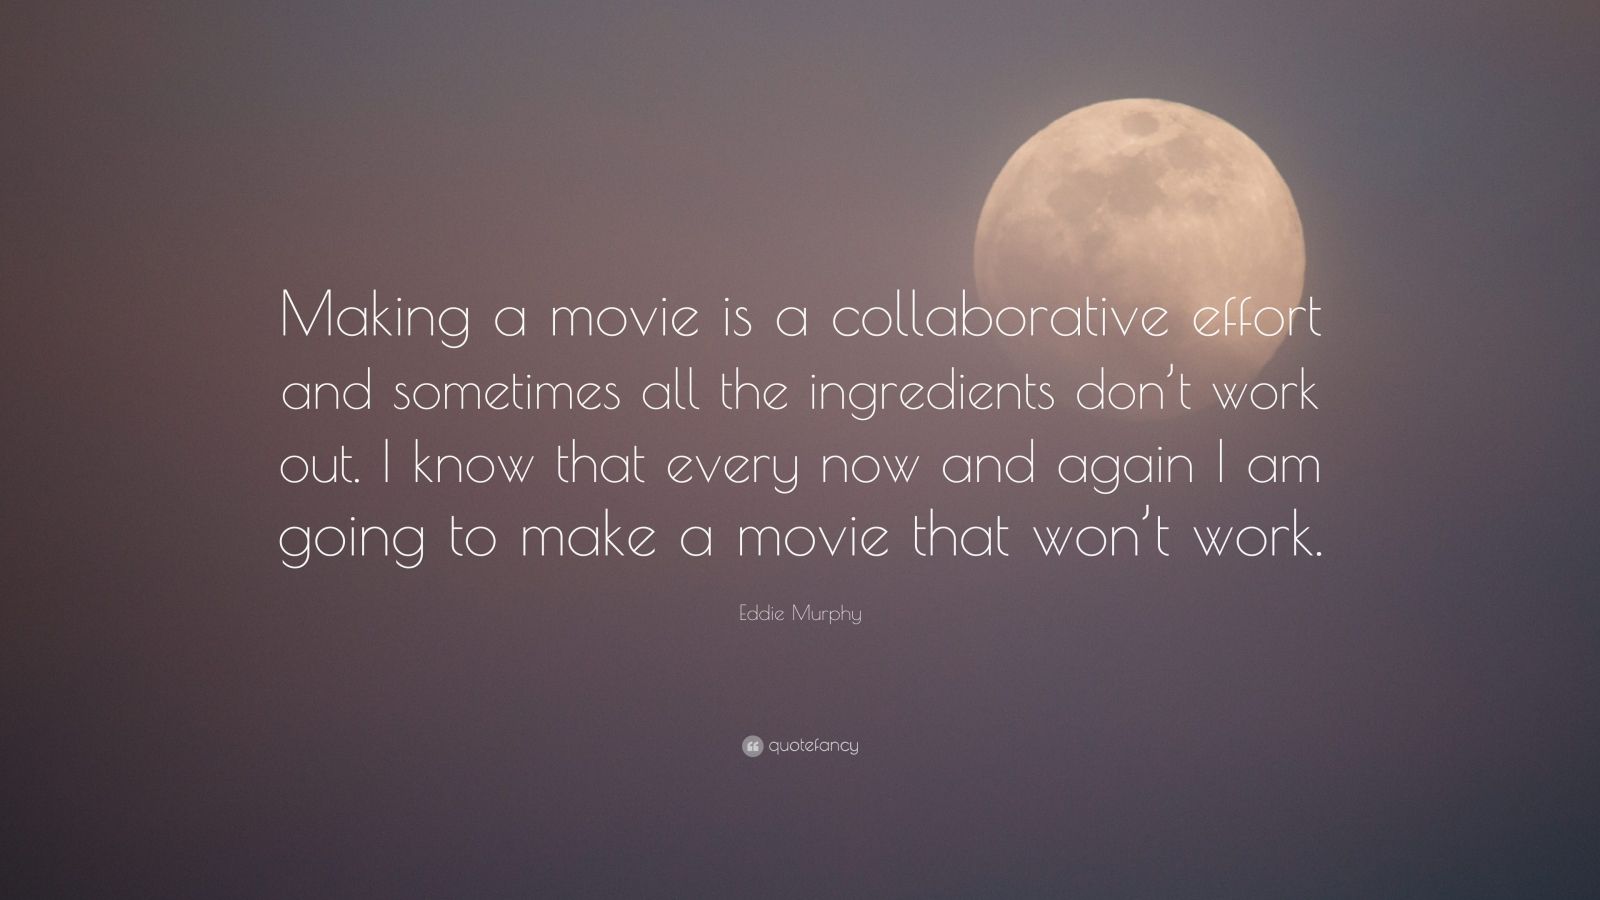 Eddie Murphy Quote: “Making a movie is a collaborative effort and